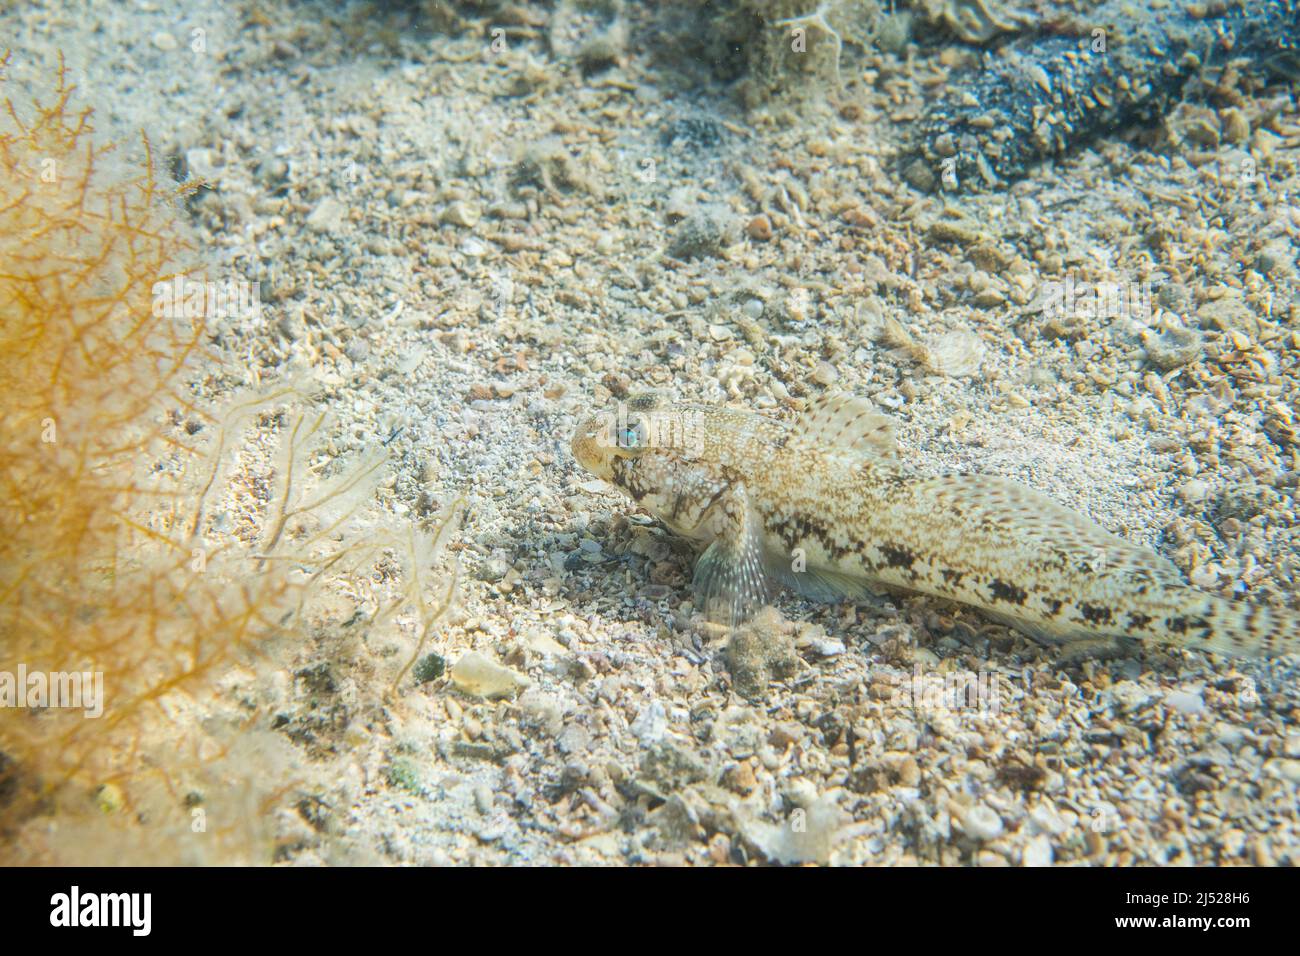 The slender goby (Gobius geniporus) is a species of goby endemic to the Mediterranean Sea. Stock Photo